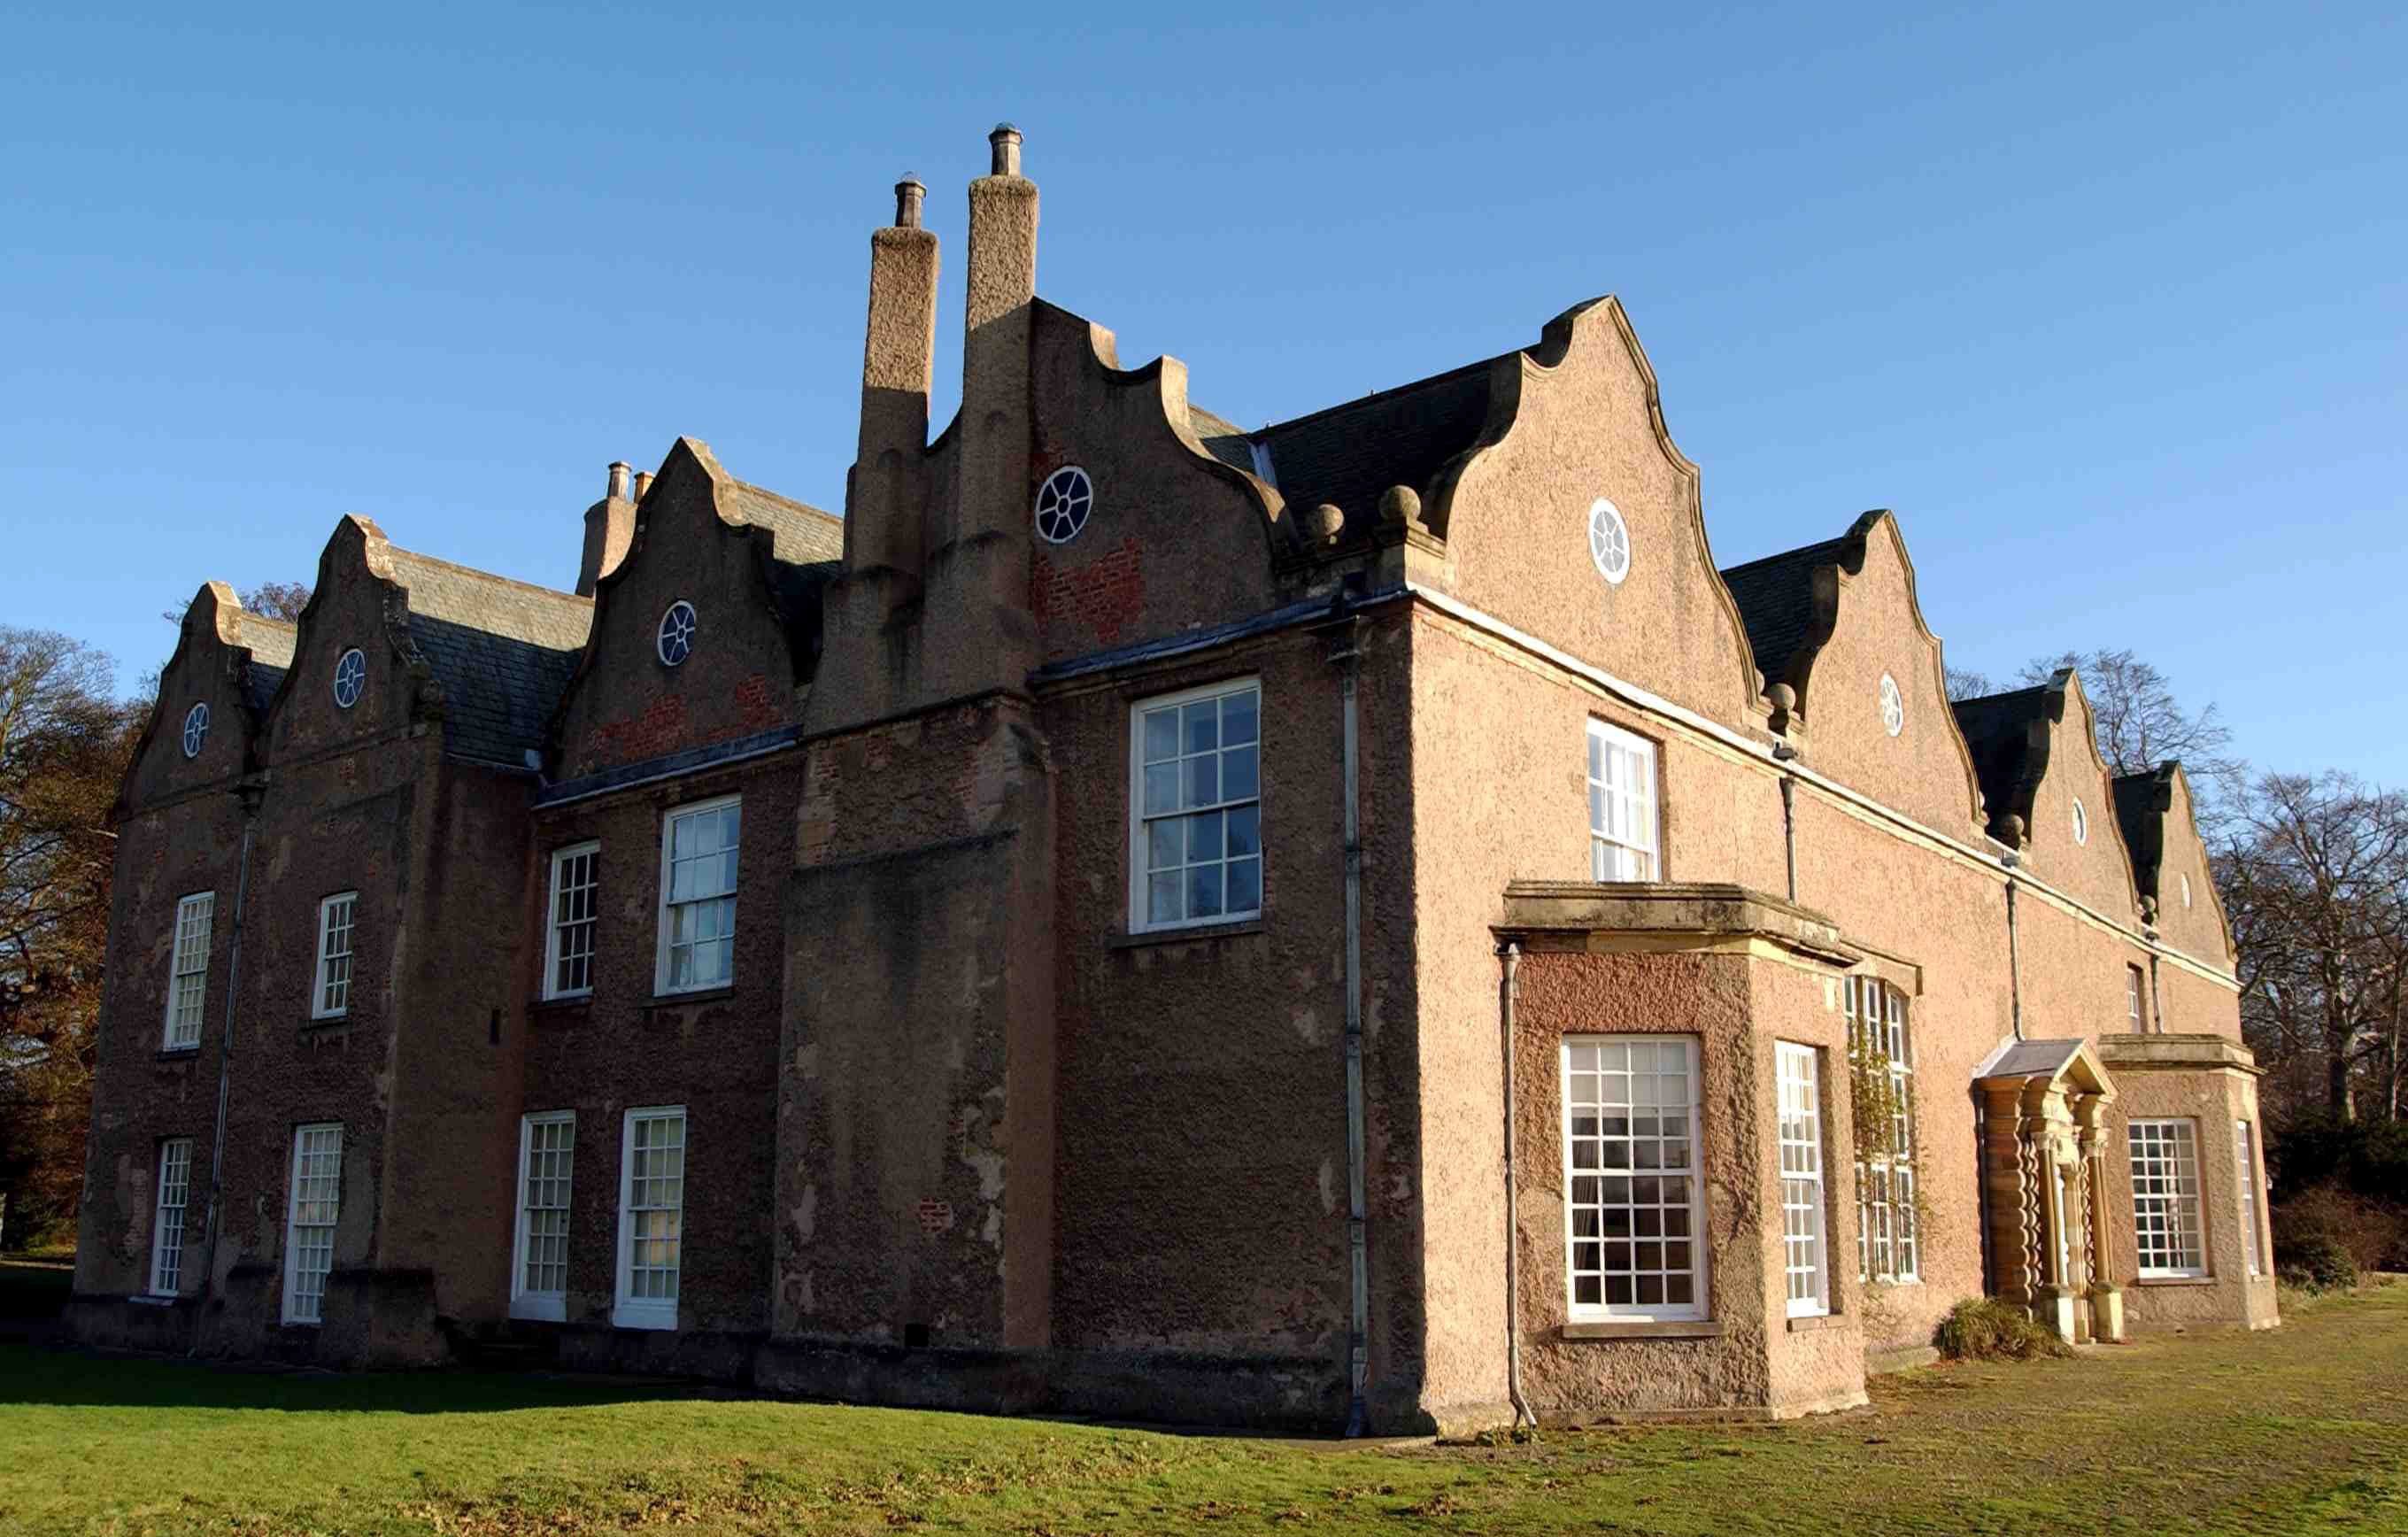 The Norton Conyers manor house, which Charlotte Brontë visited in 1839